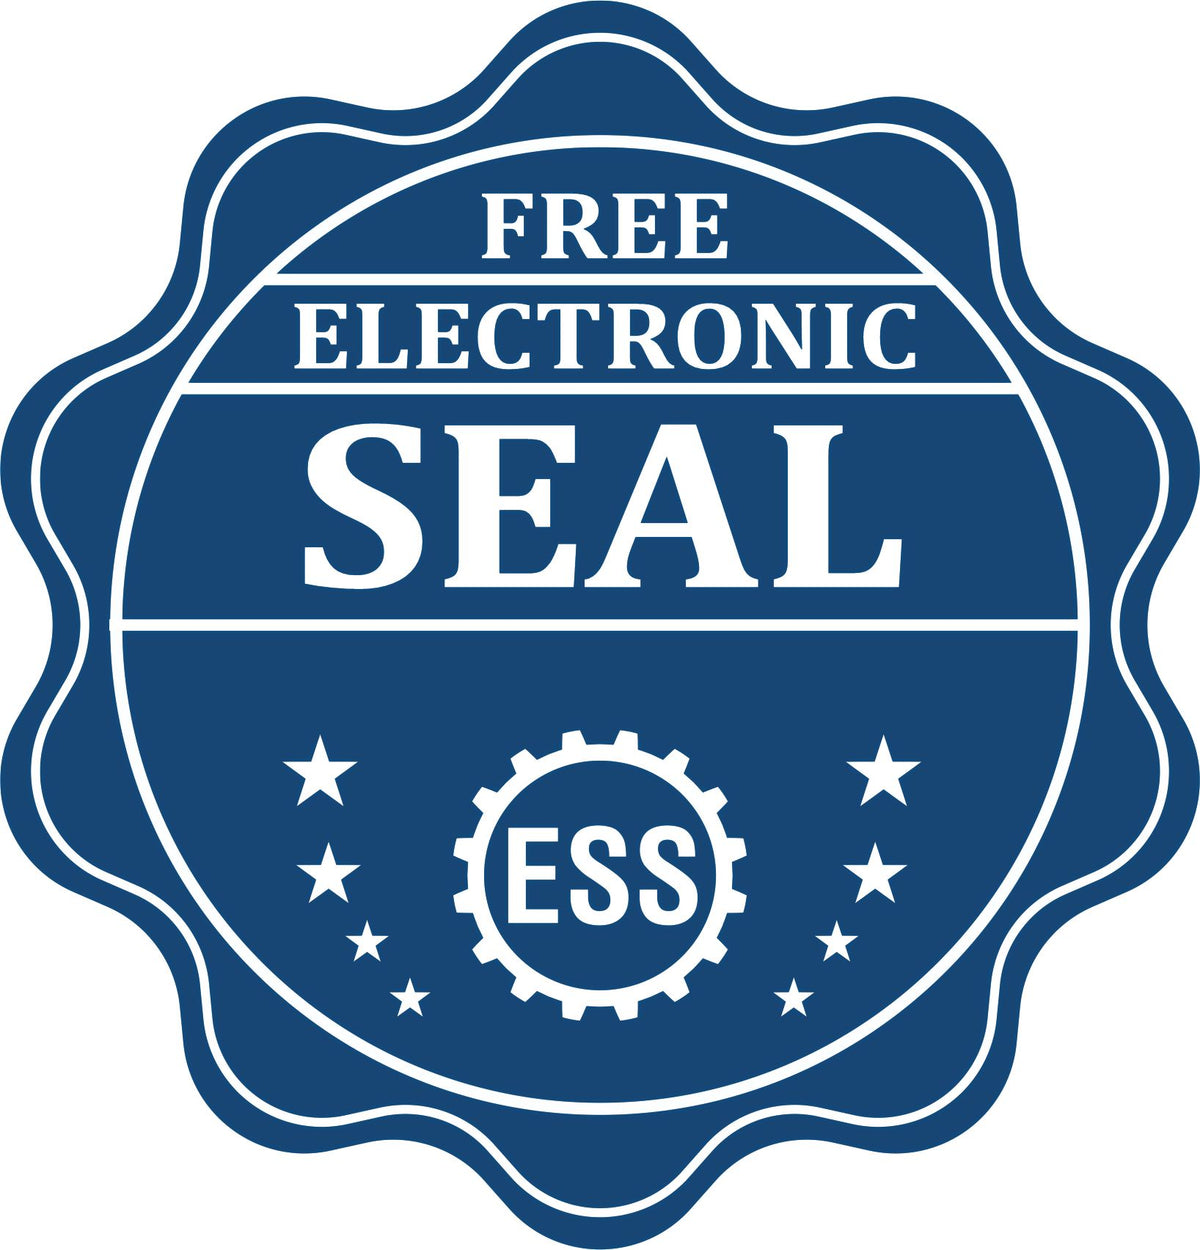 A badge showing a free electronic seal for the Virginia Professional Engineer Seal Stamp with stars and the ESS gear on the emblem.